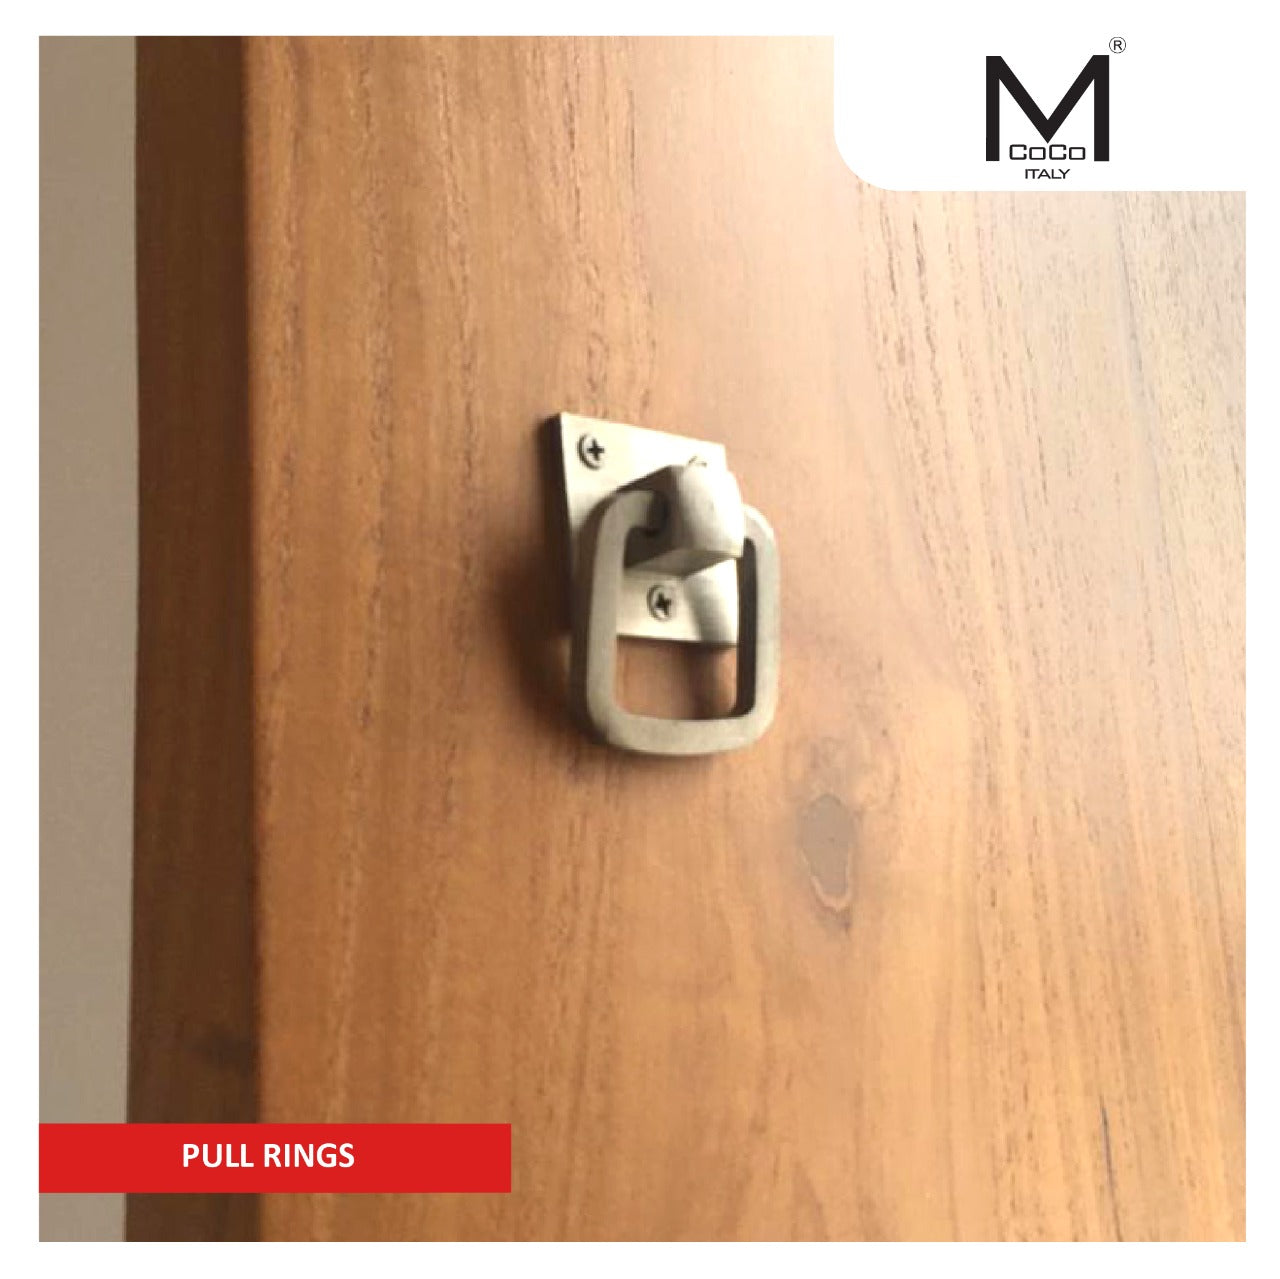 Stylish and durable Mcoco Pull Rings for cabinets and drawers at M. M. Noorbhoy & Co.